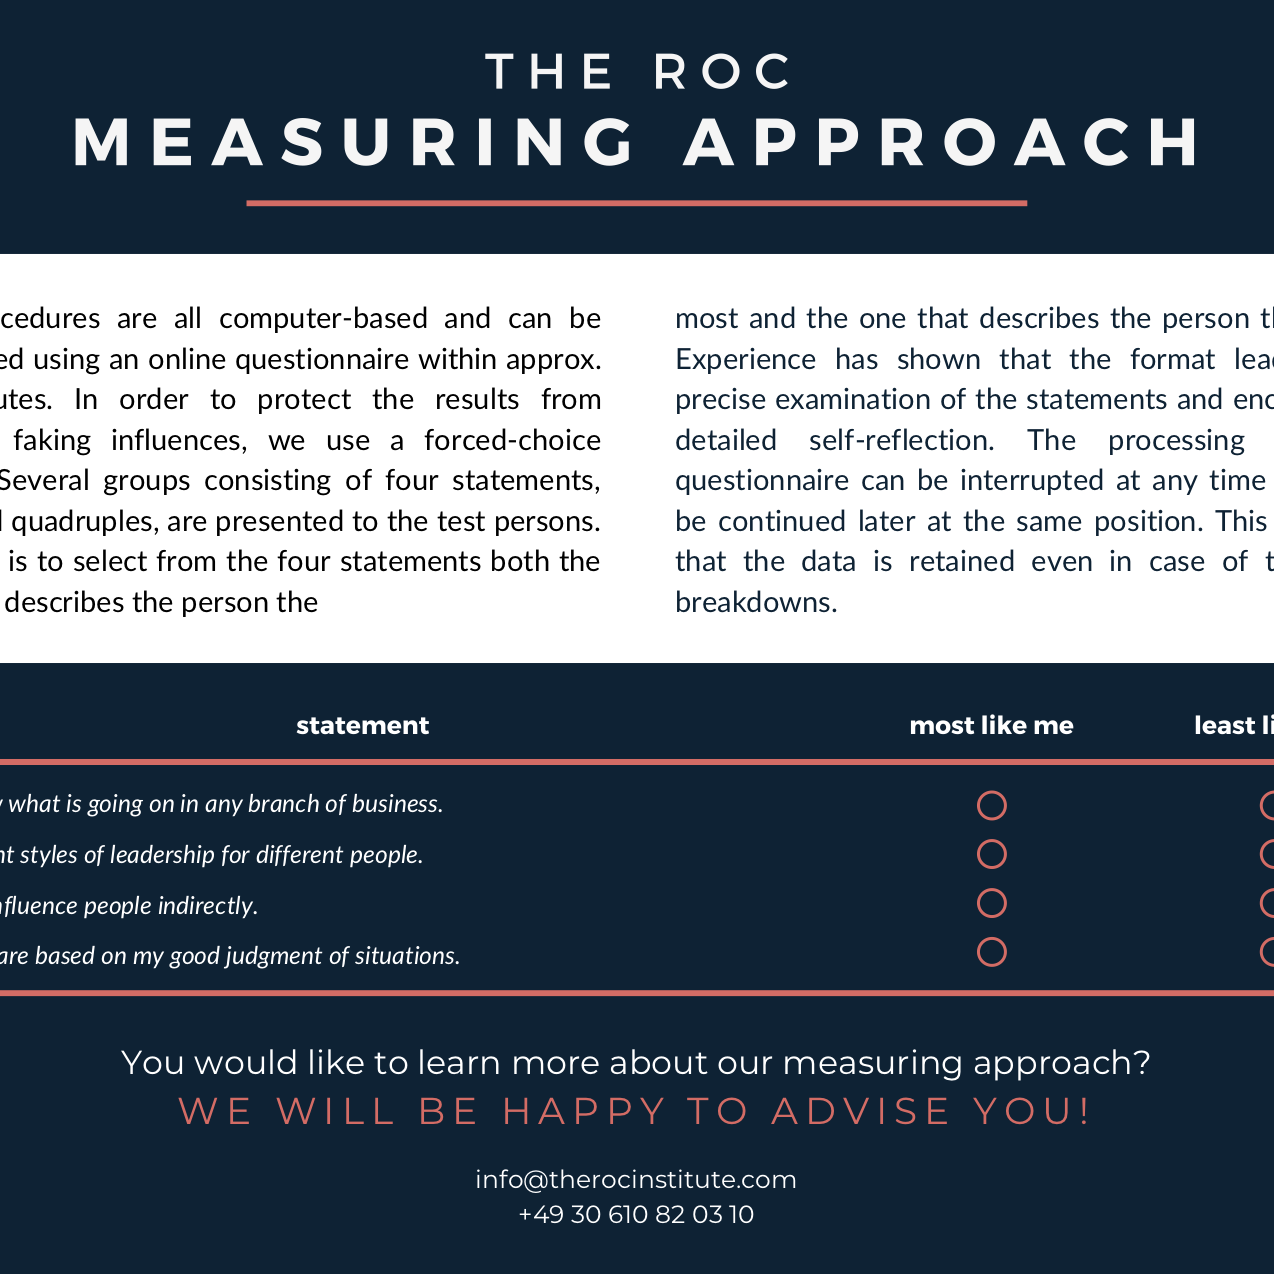 The ROC Measuring approach